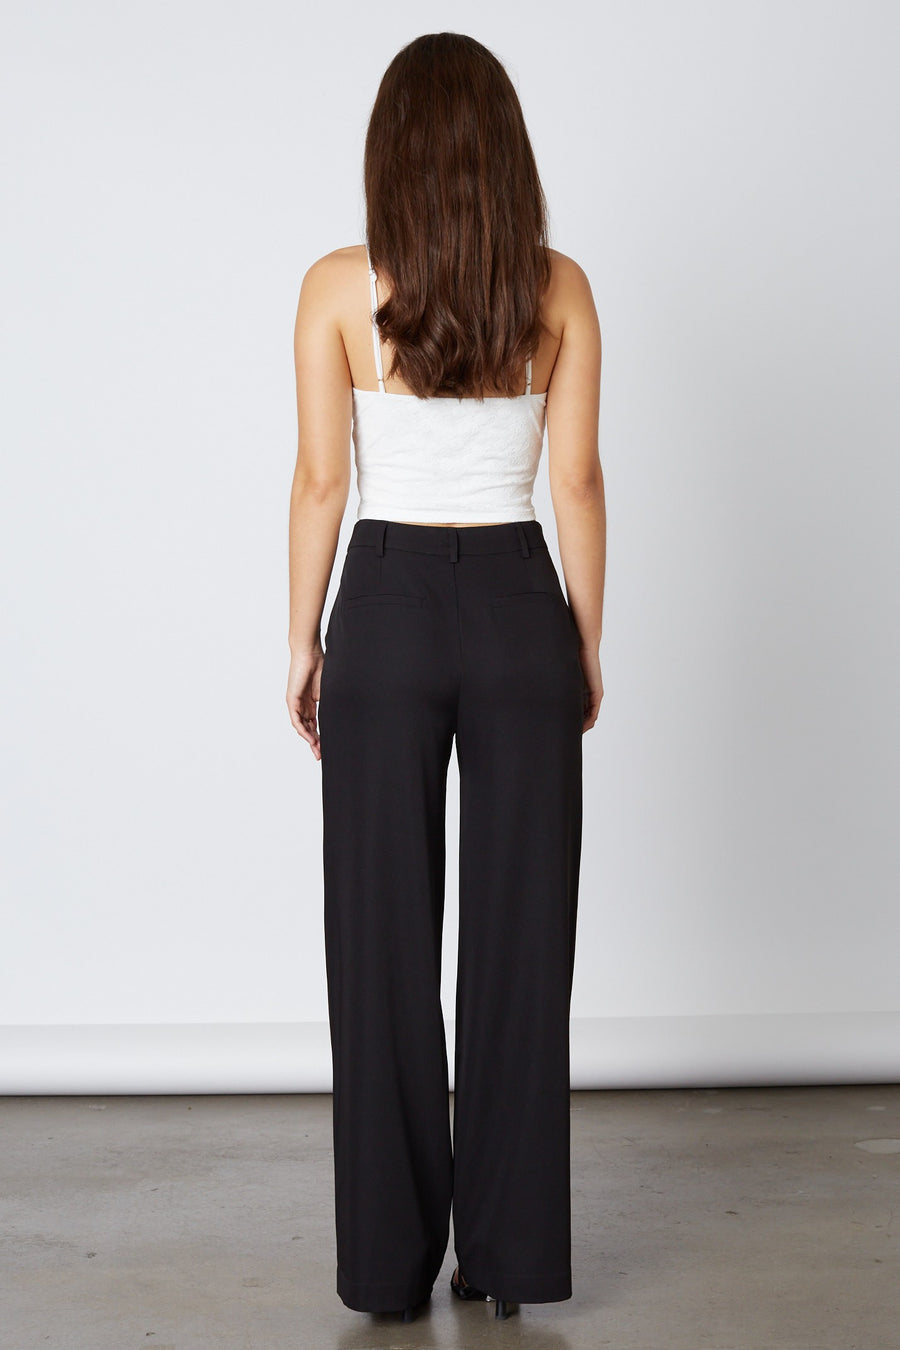 High waisted leg trouser pants in the color Black.